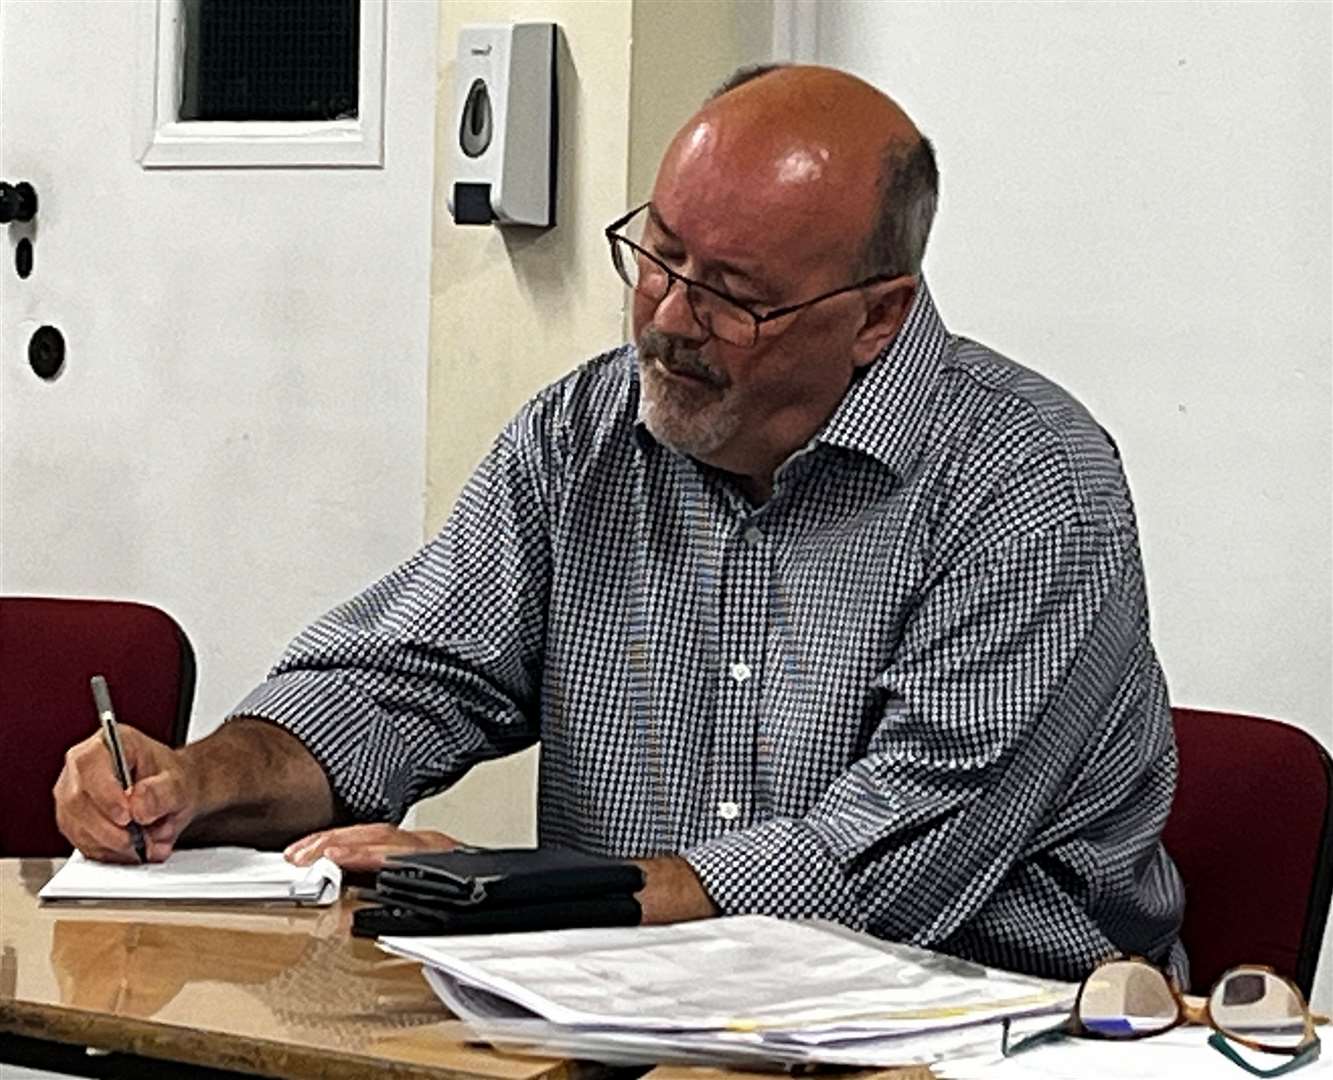 Toby Howe from KCC Highways took notes on residents' comments